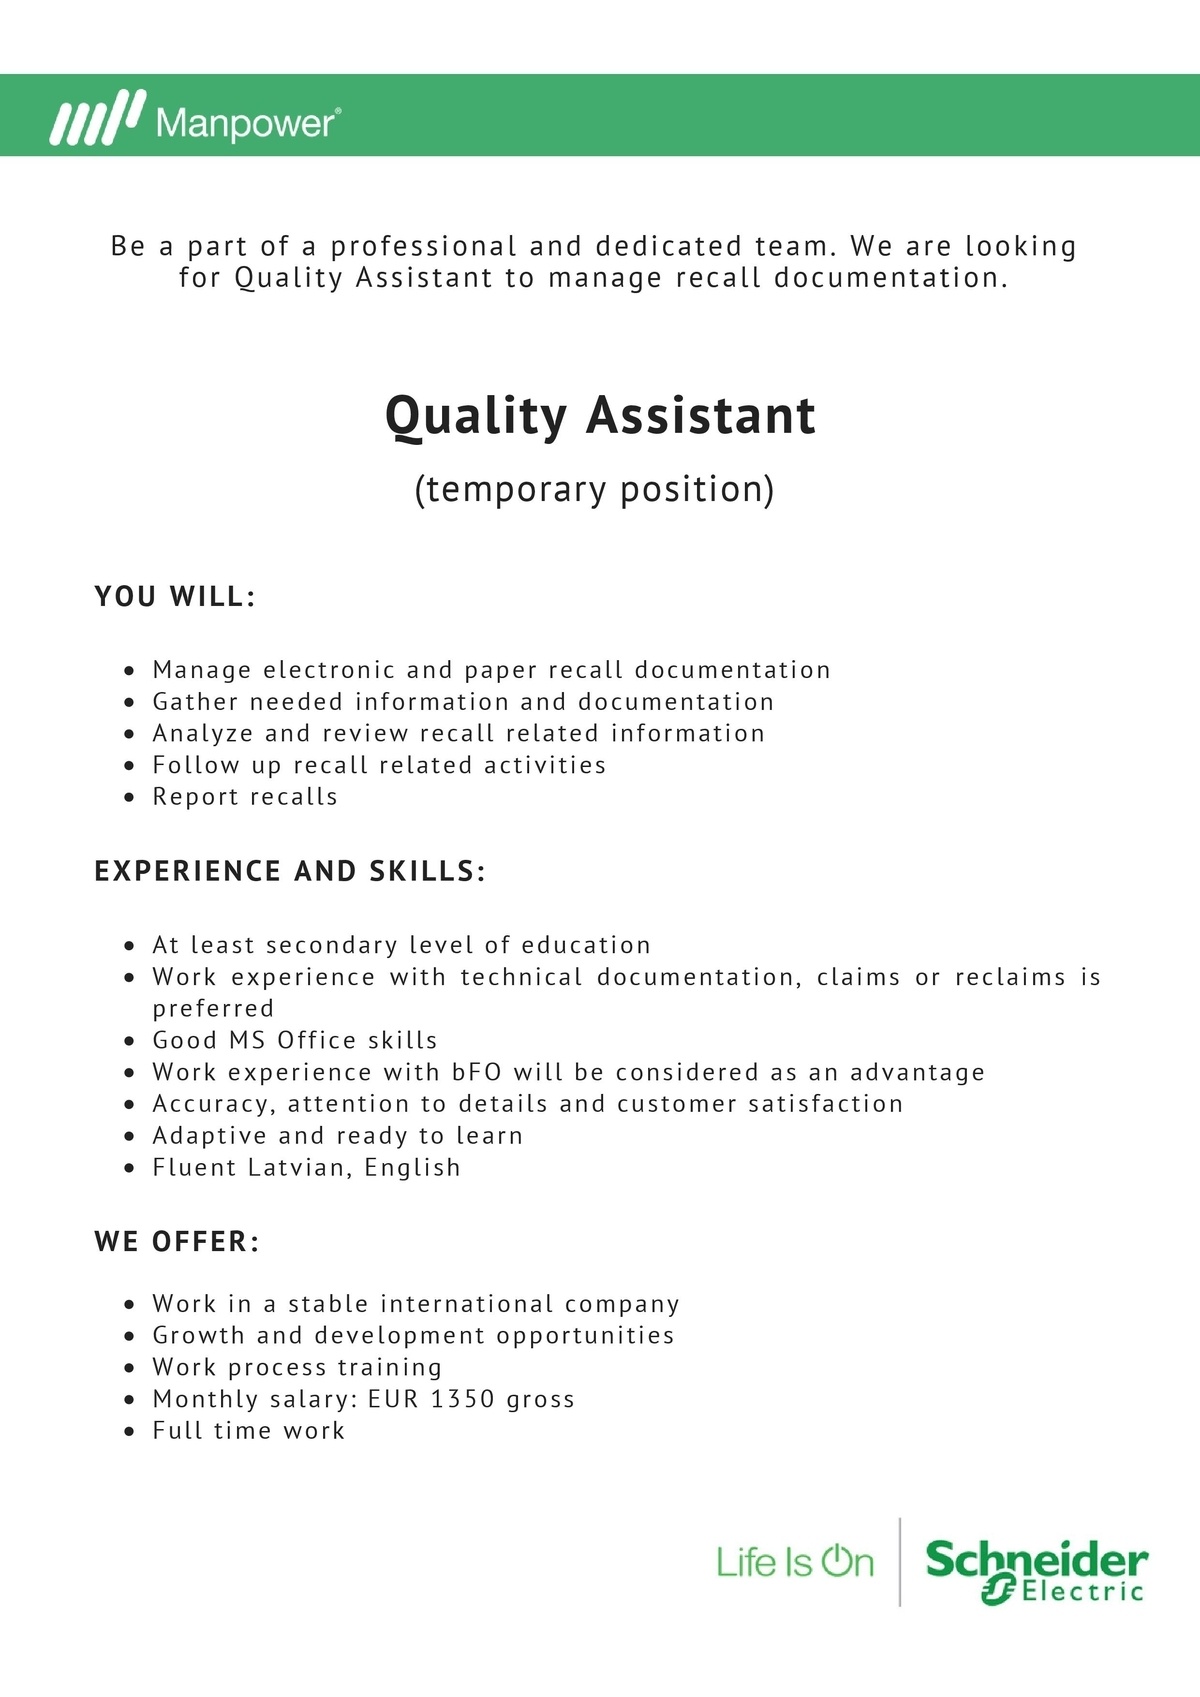 Manpower Lit, AKF Quality Assistant (temporary position)